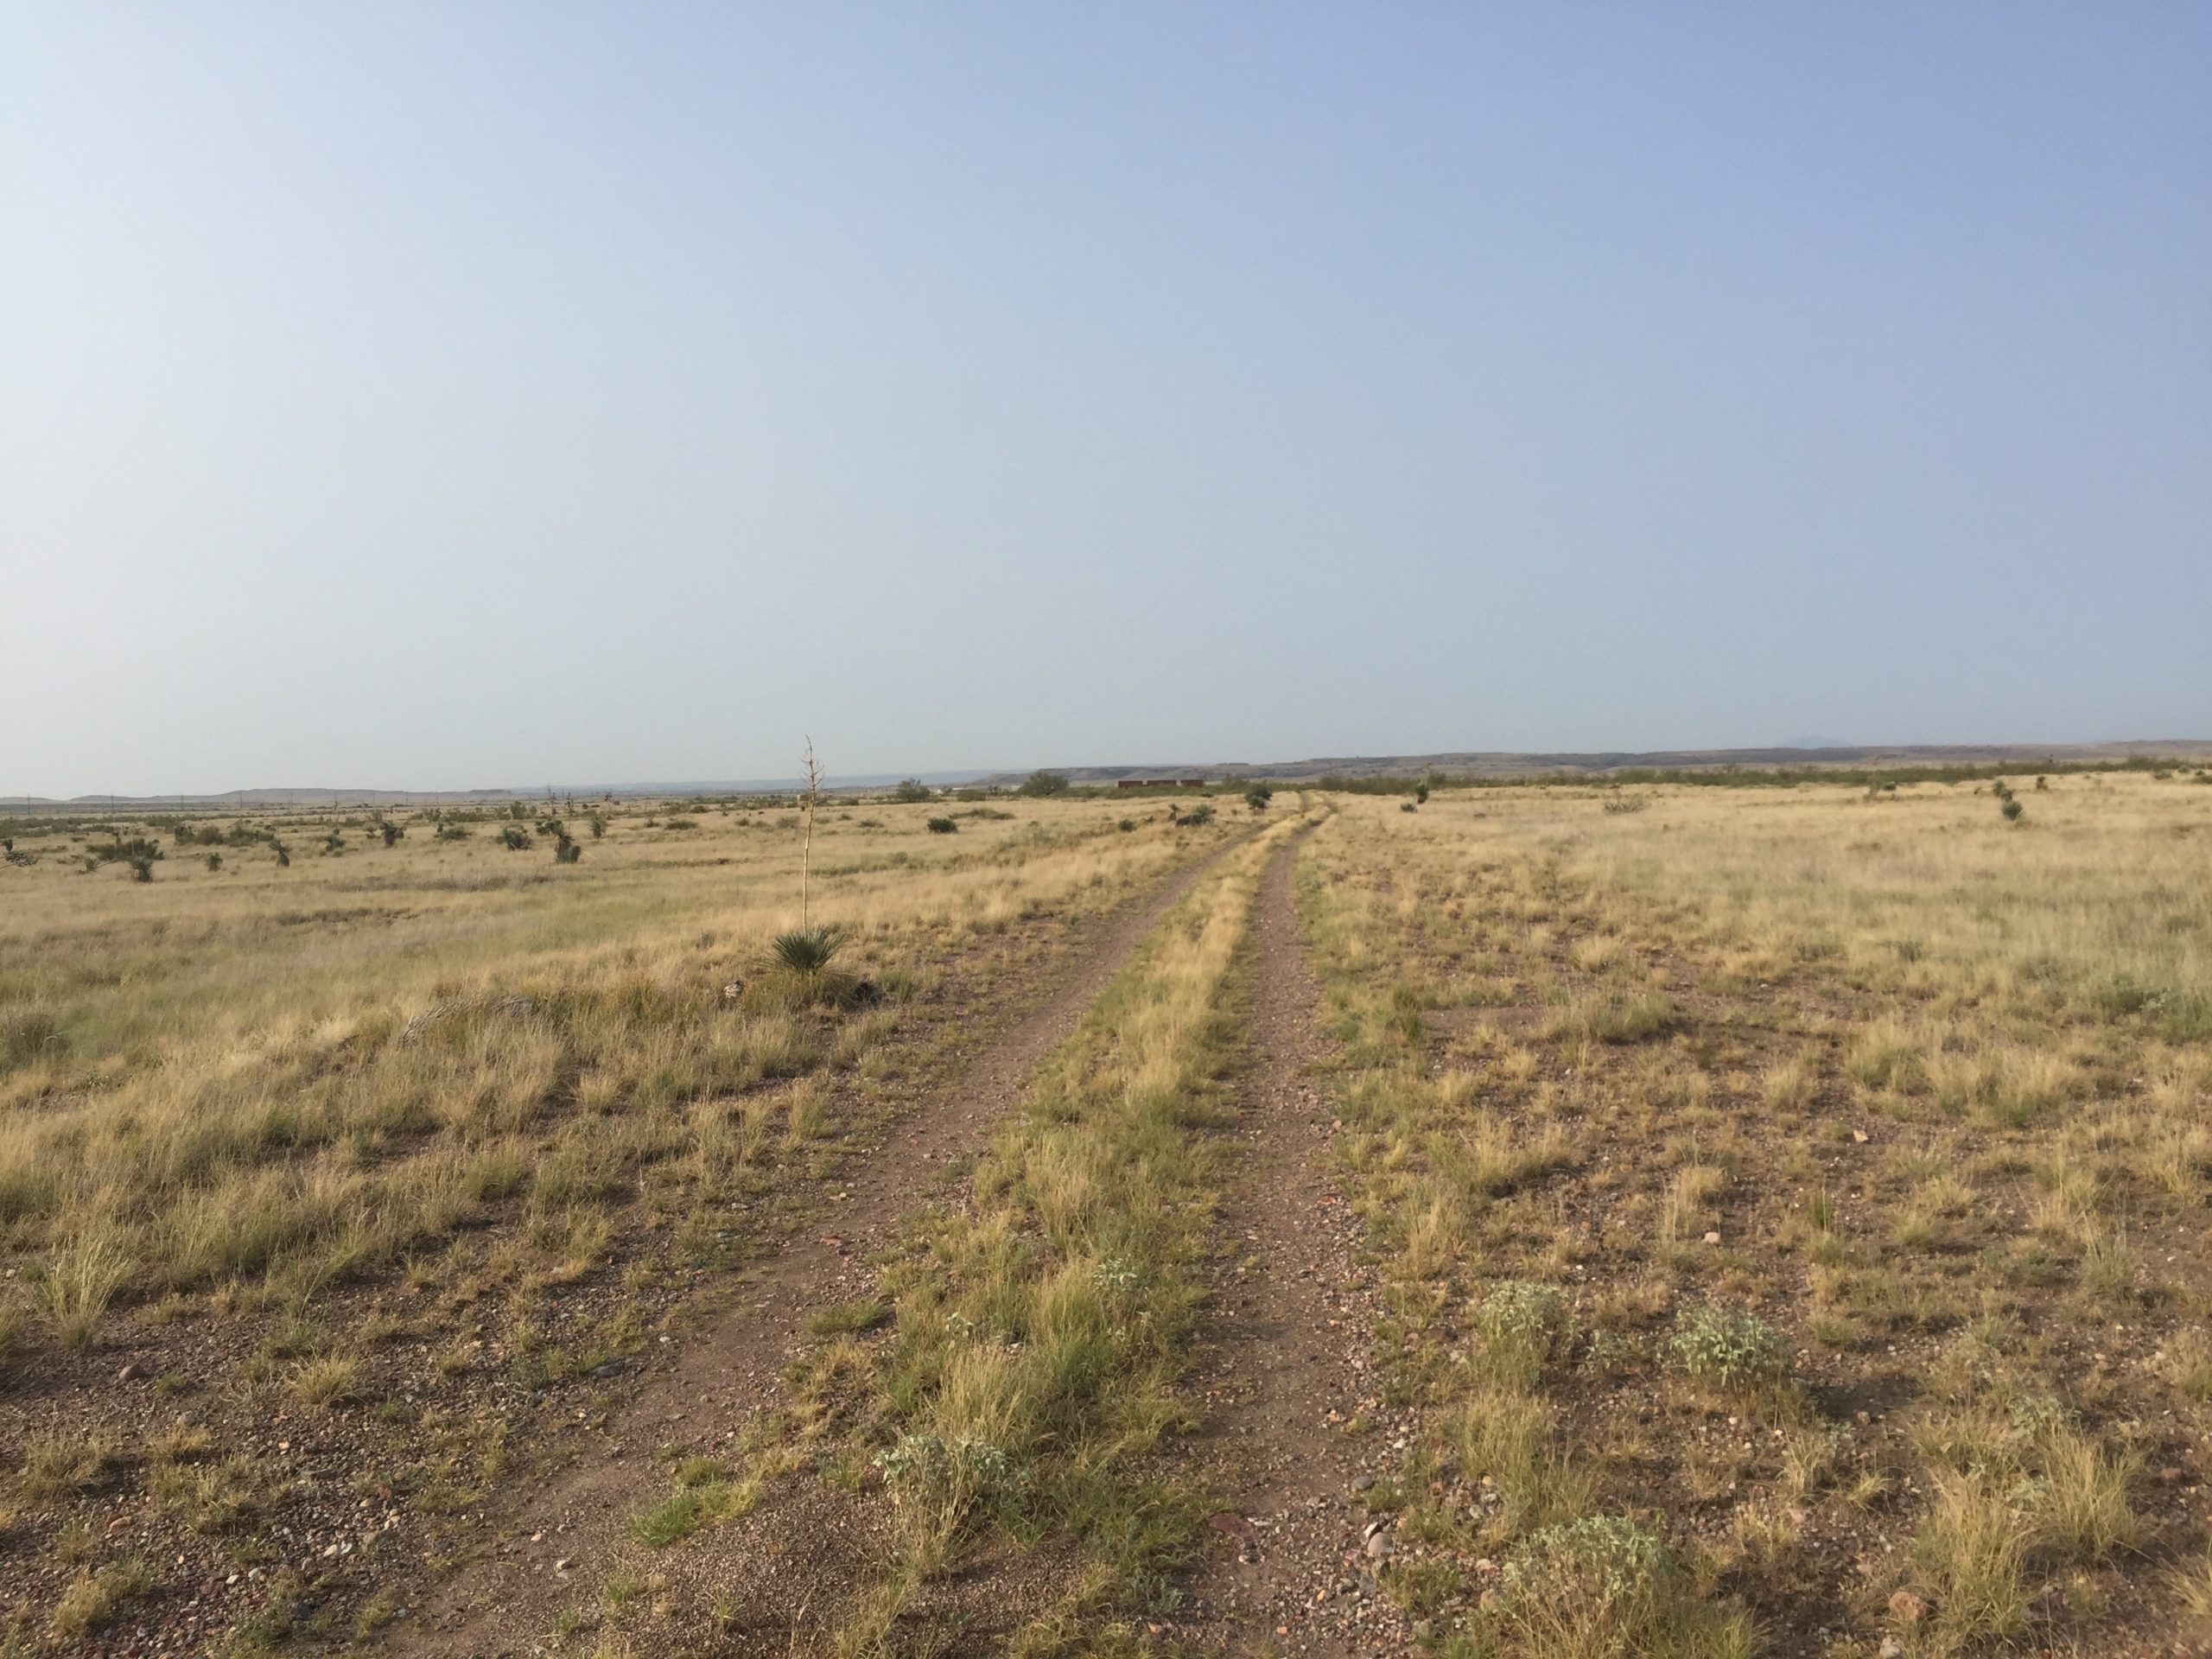 View of a dirt road with two tire tracks stretching toward the horizon in a desert landscape covered with scrub grass